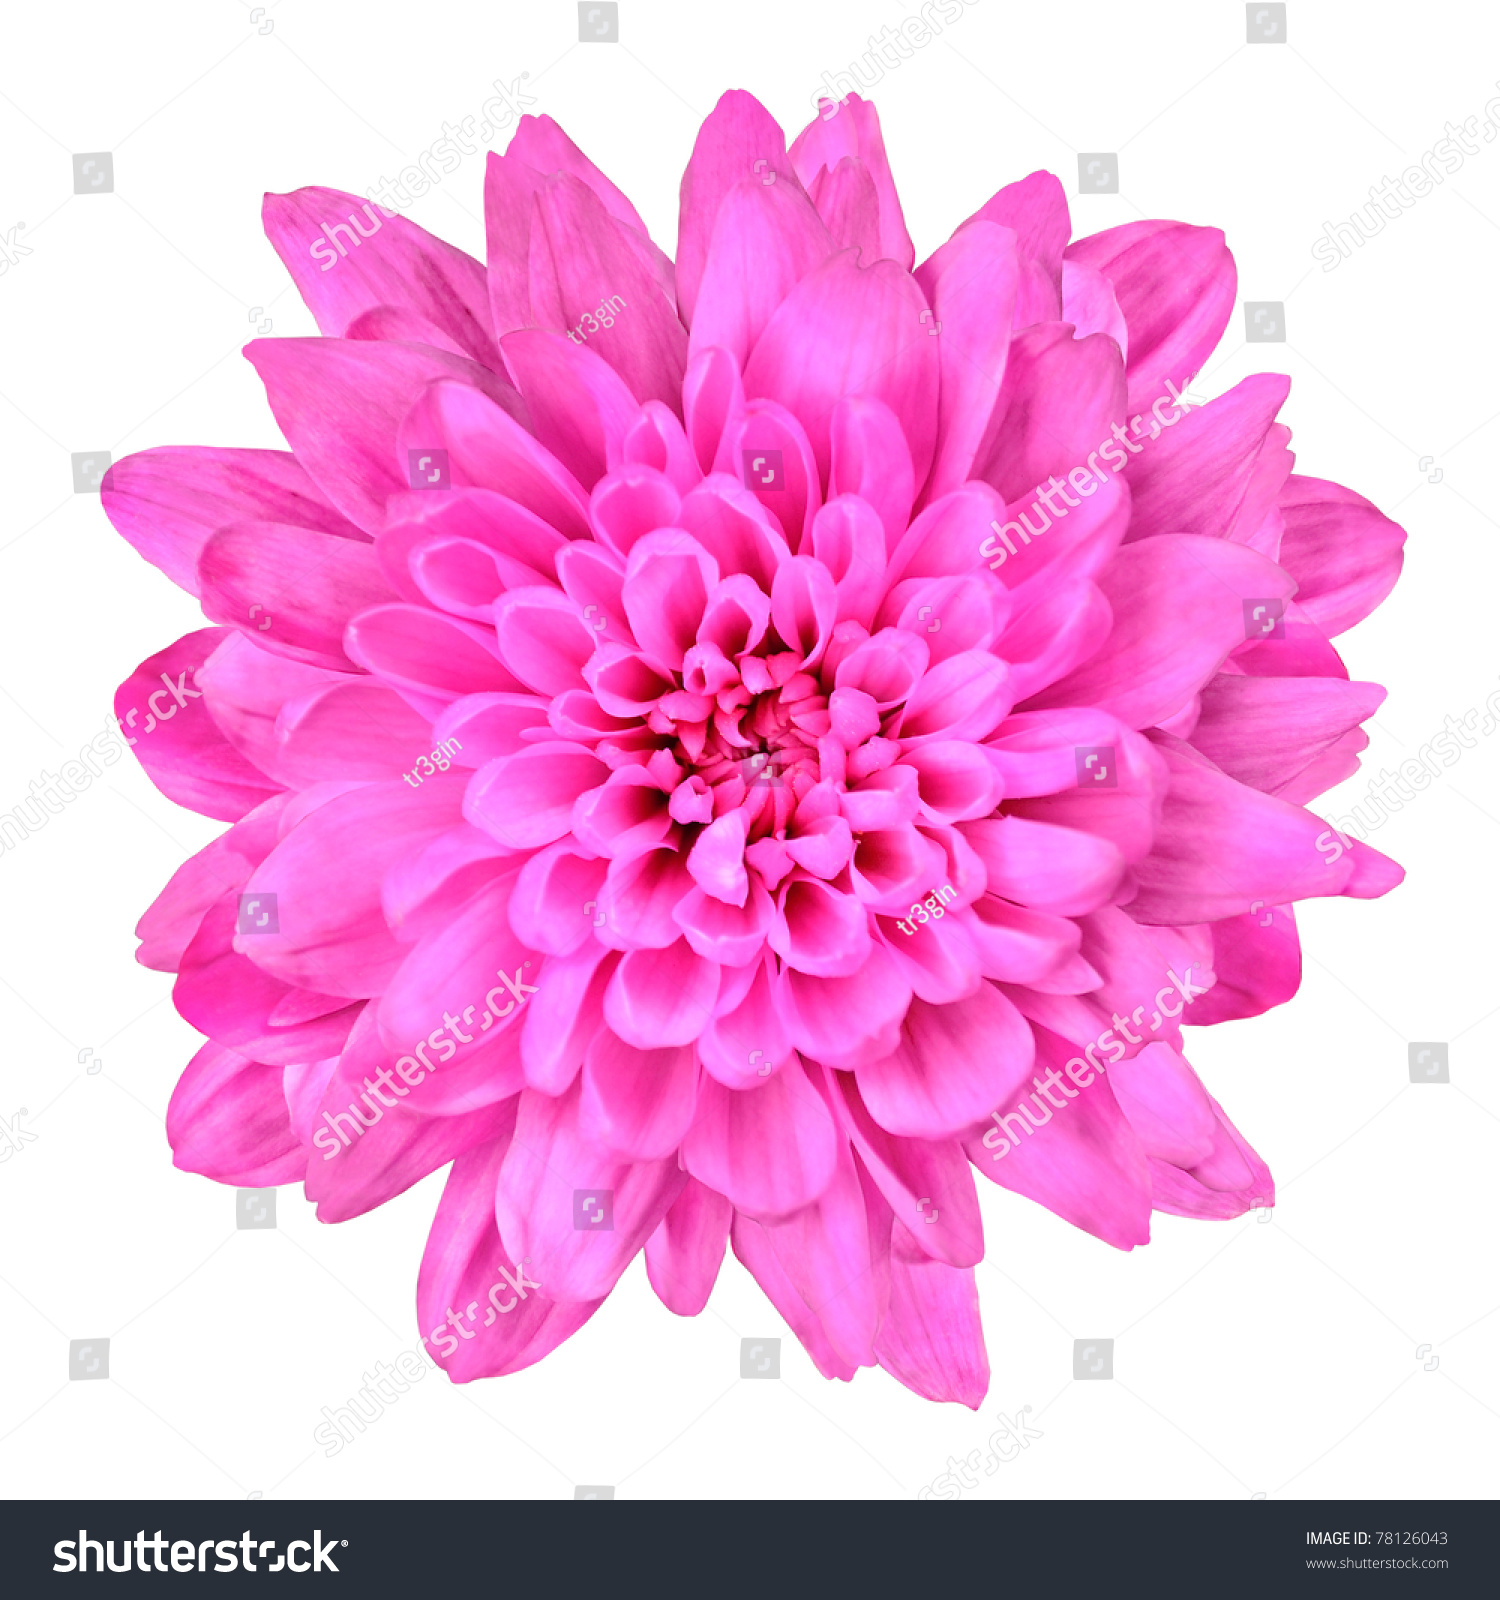 One Pink Chrysanthemum Flower Isolated Over White